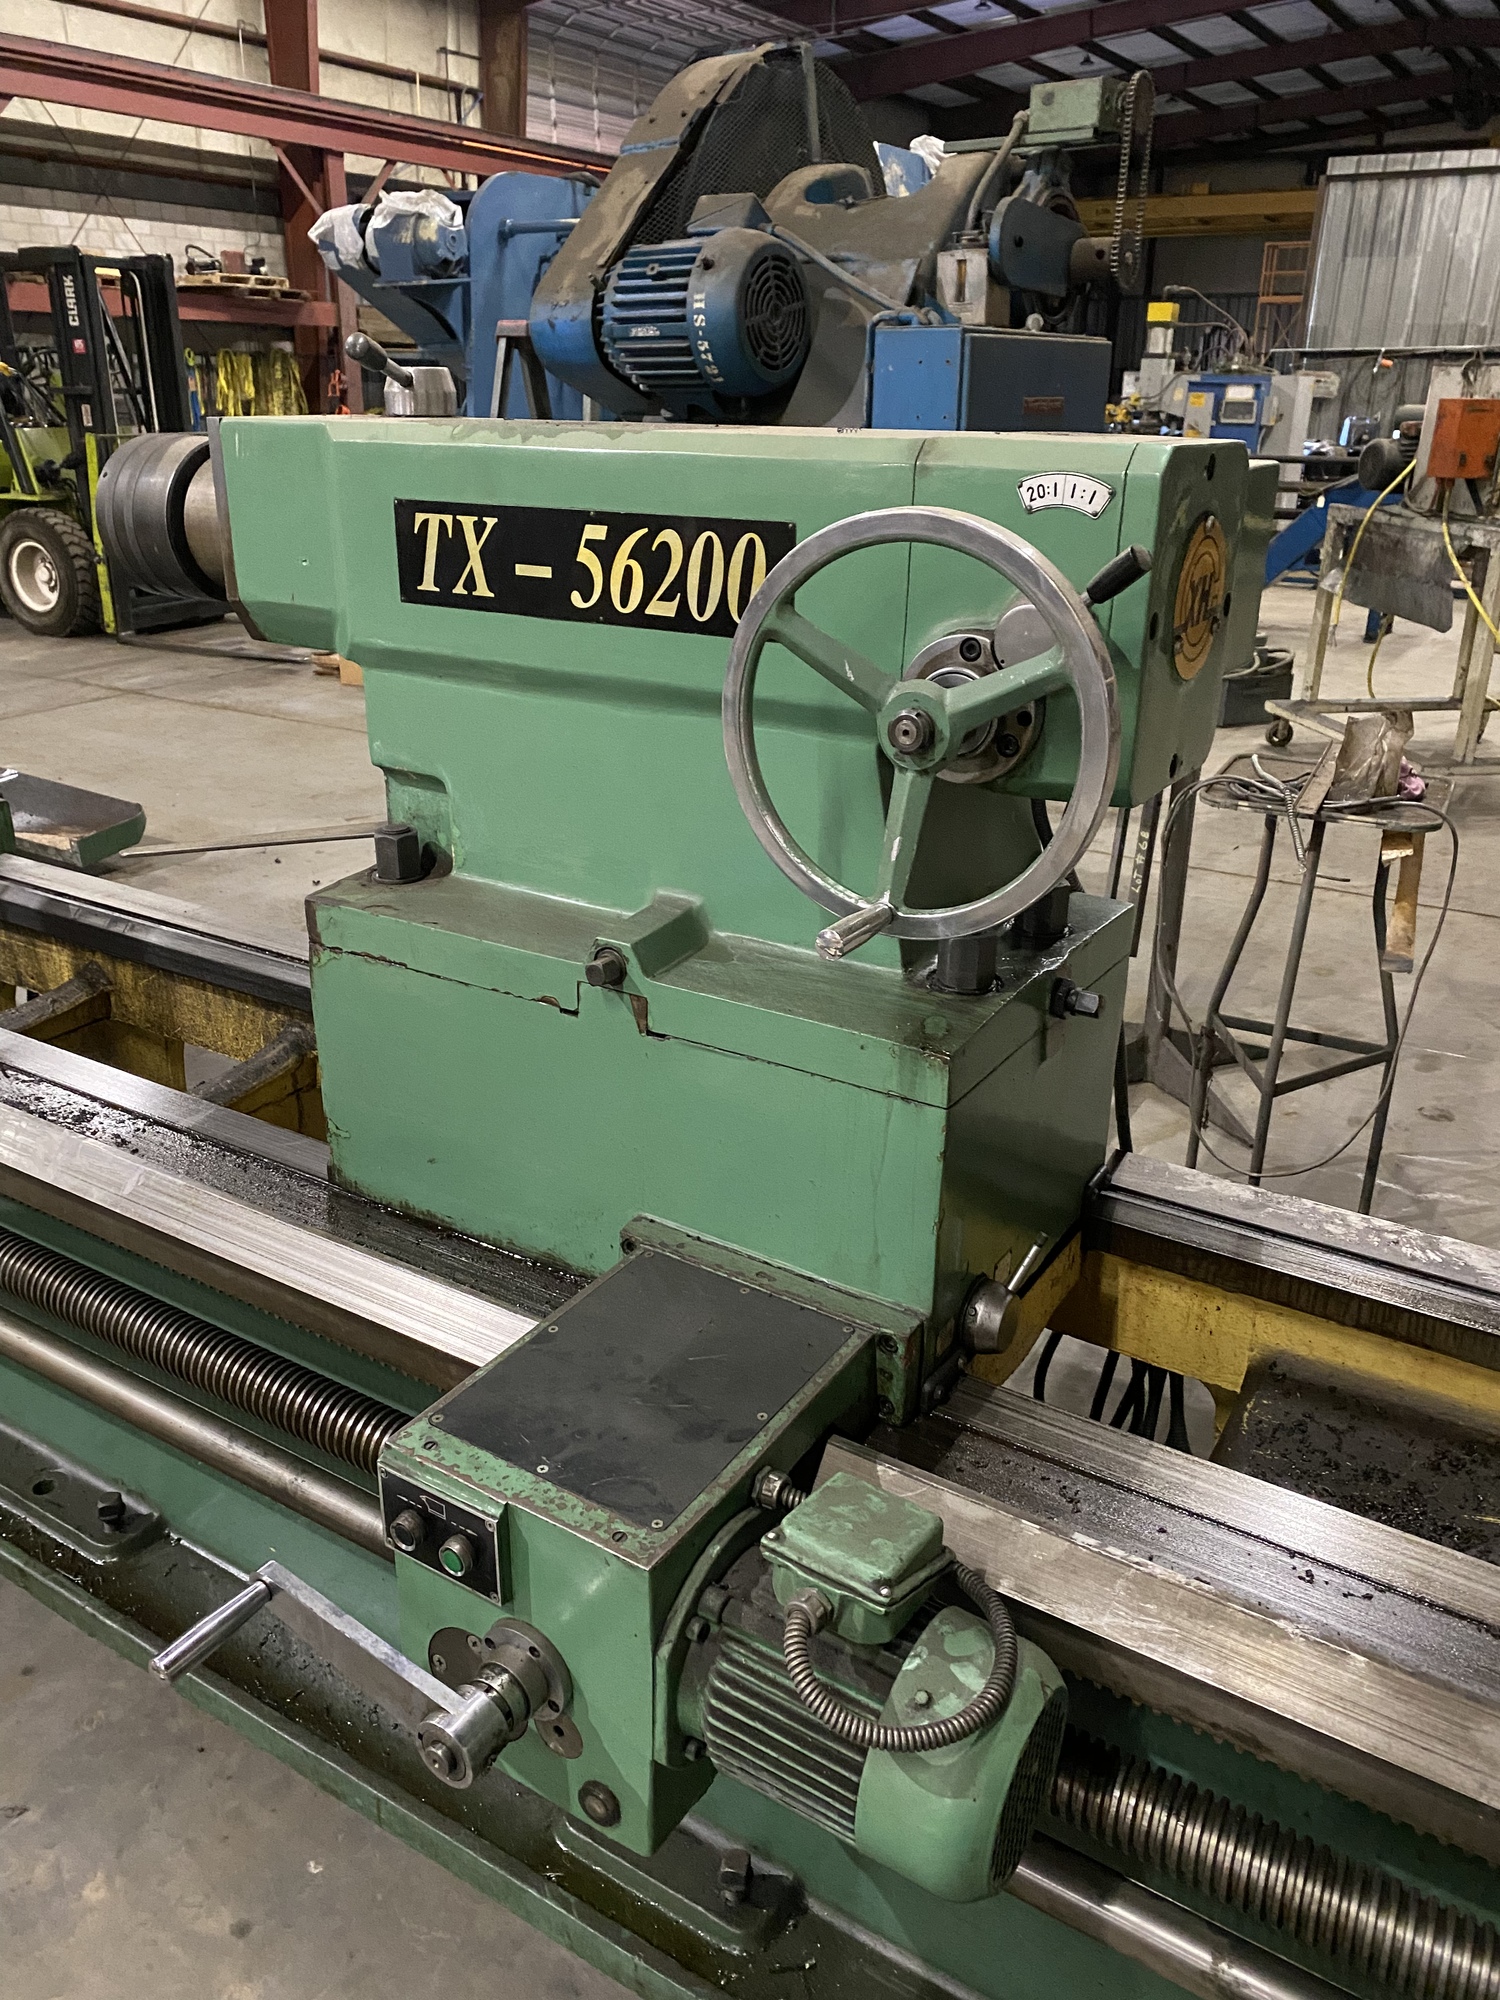 MIGHTY TURN 56 LATHES, ENGINE - (See Also Other Lathe Categories) | Diamond Jack Machinery, Inc.